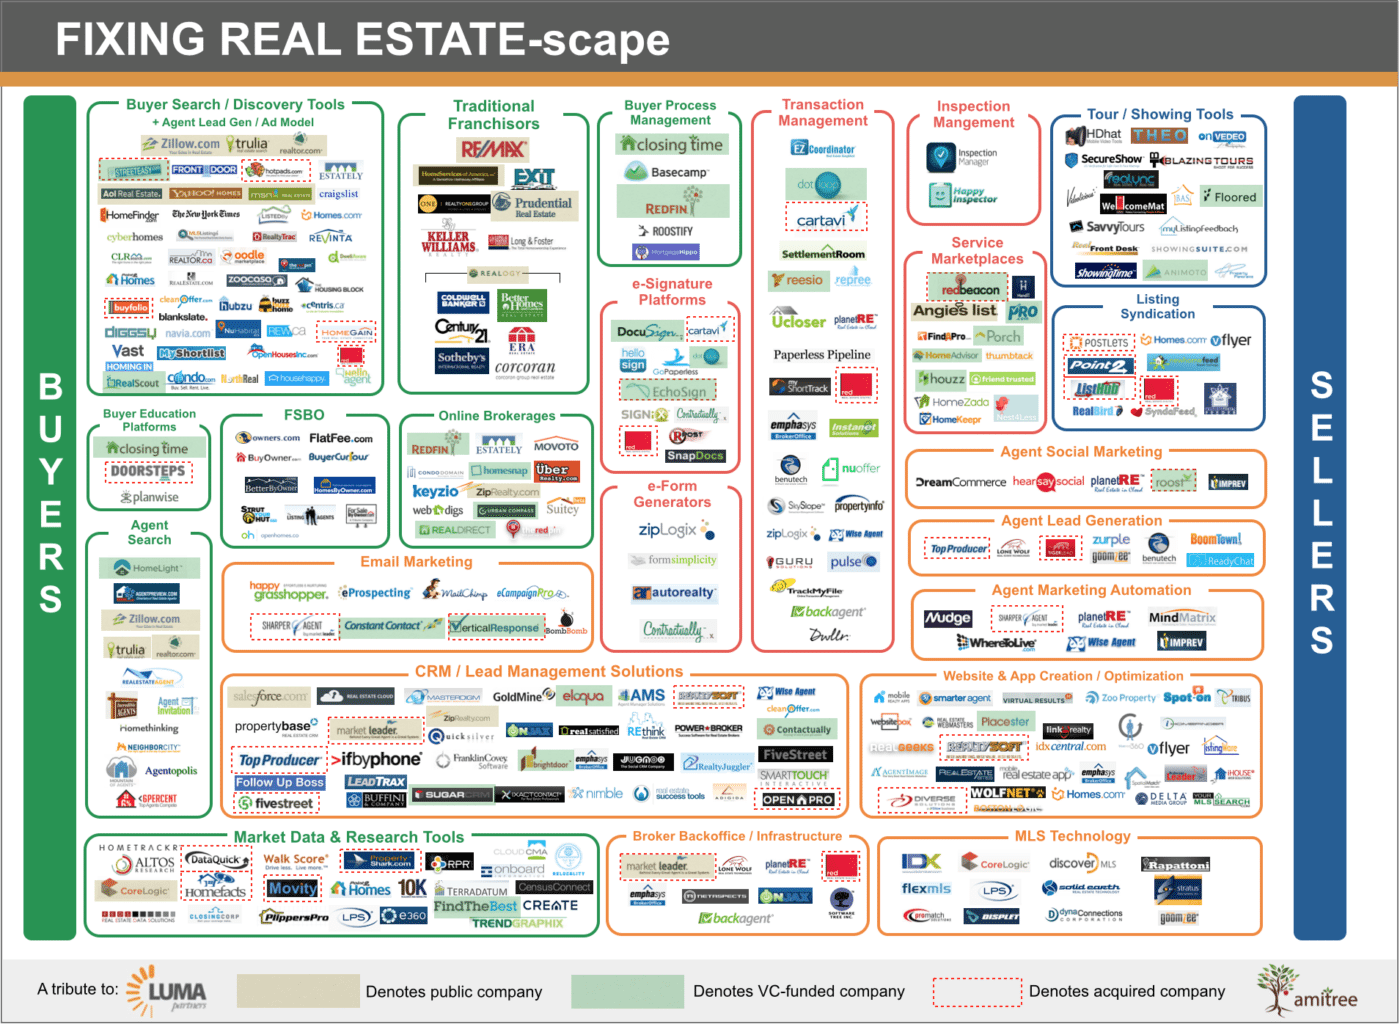 $1B invested in real estate tech, with companies bringing innovation to ...